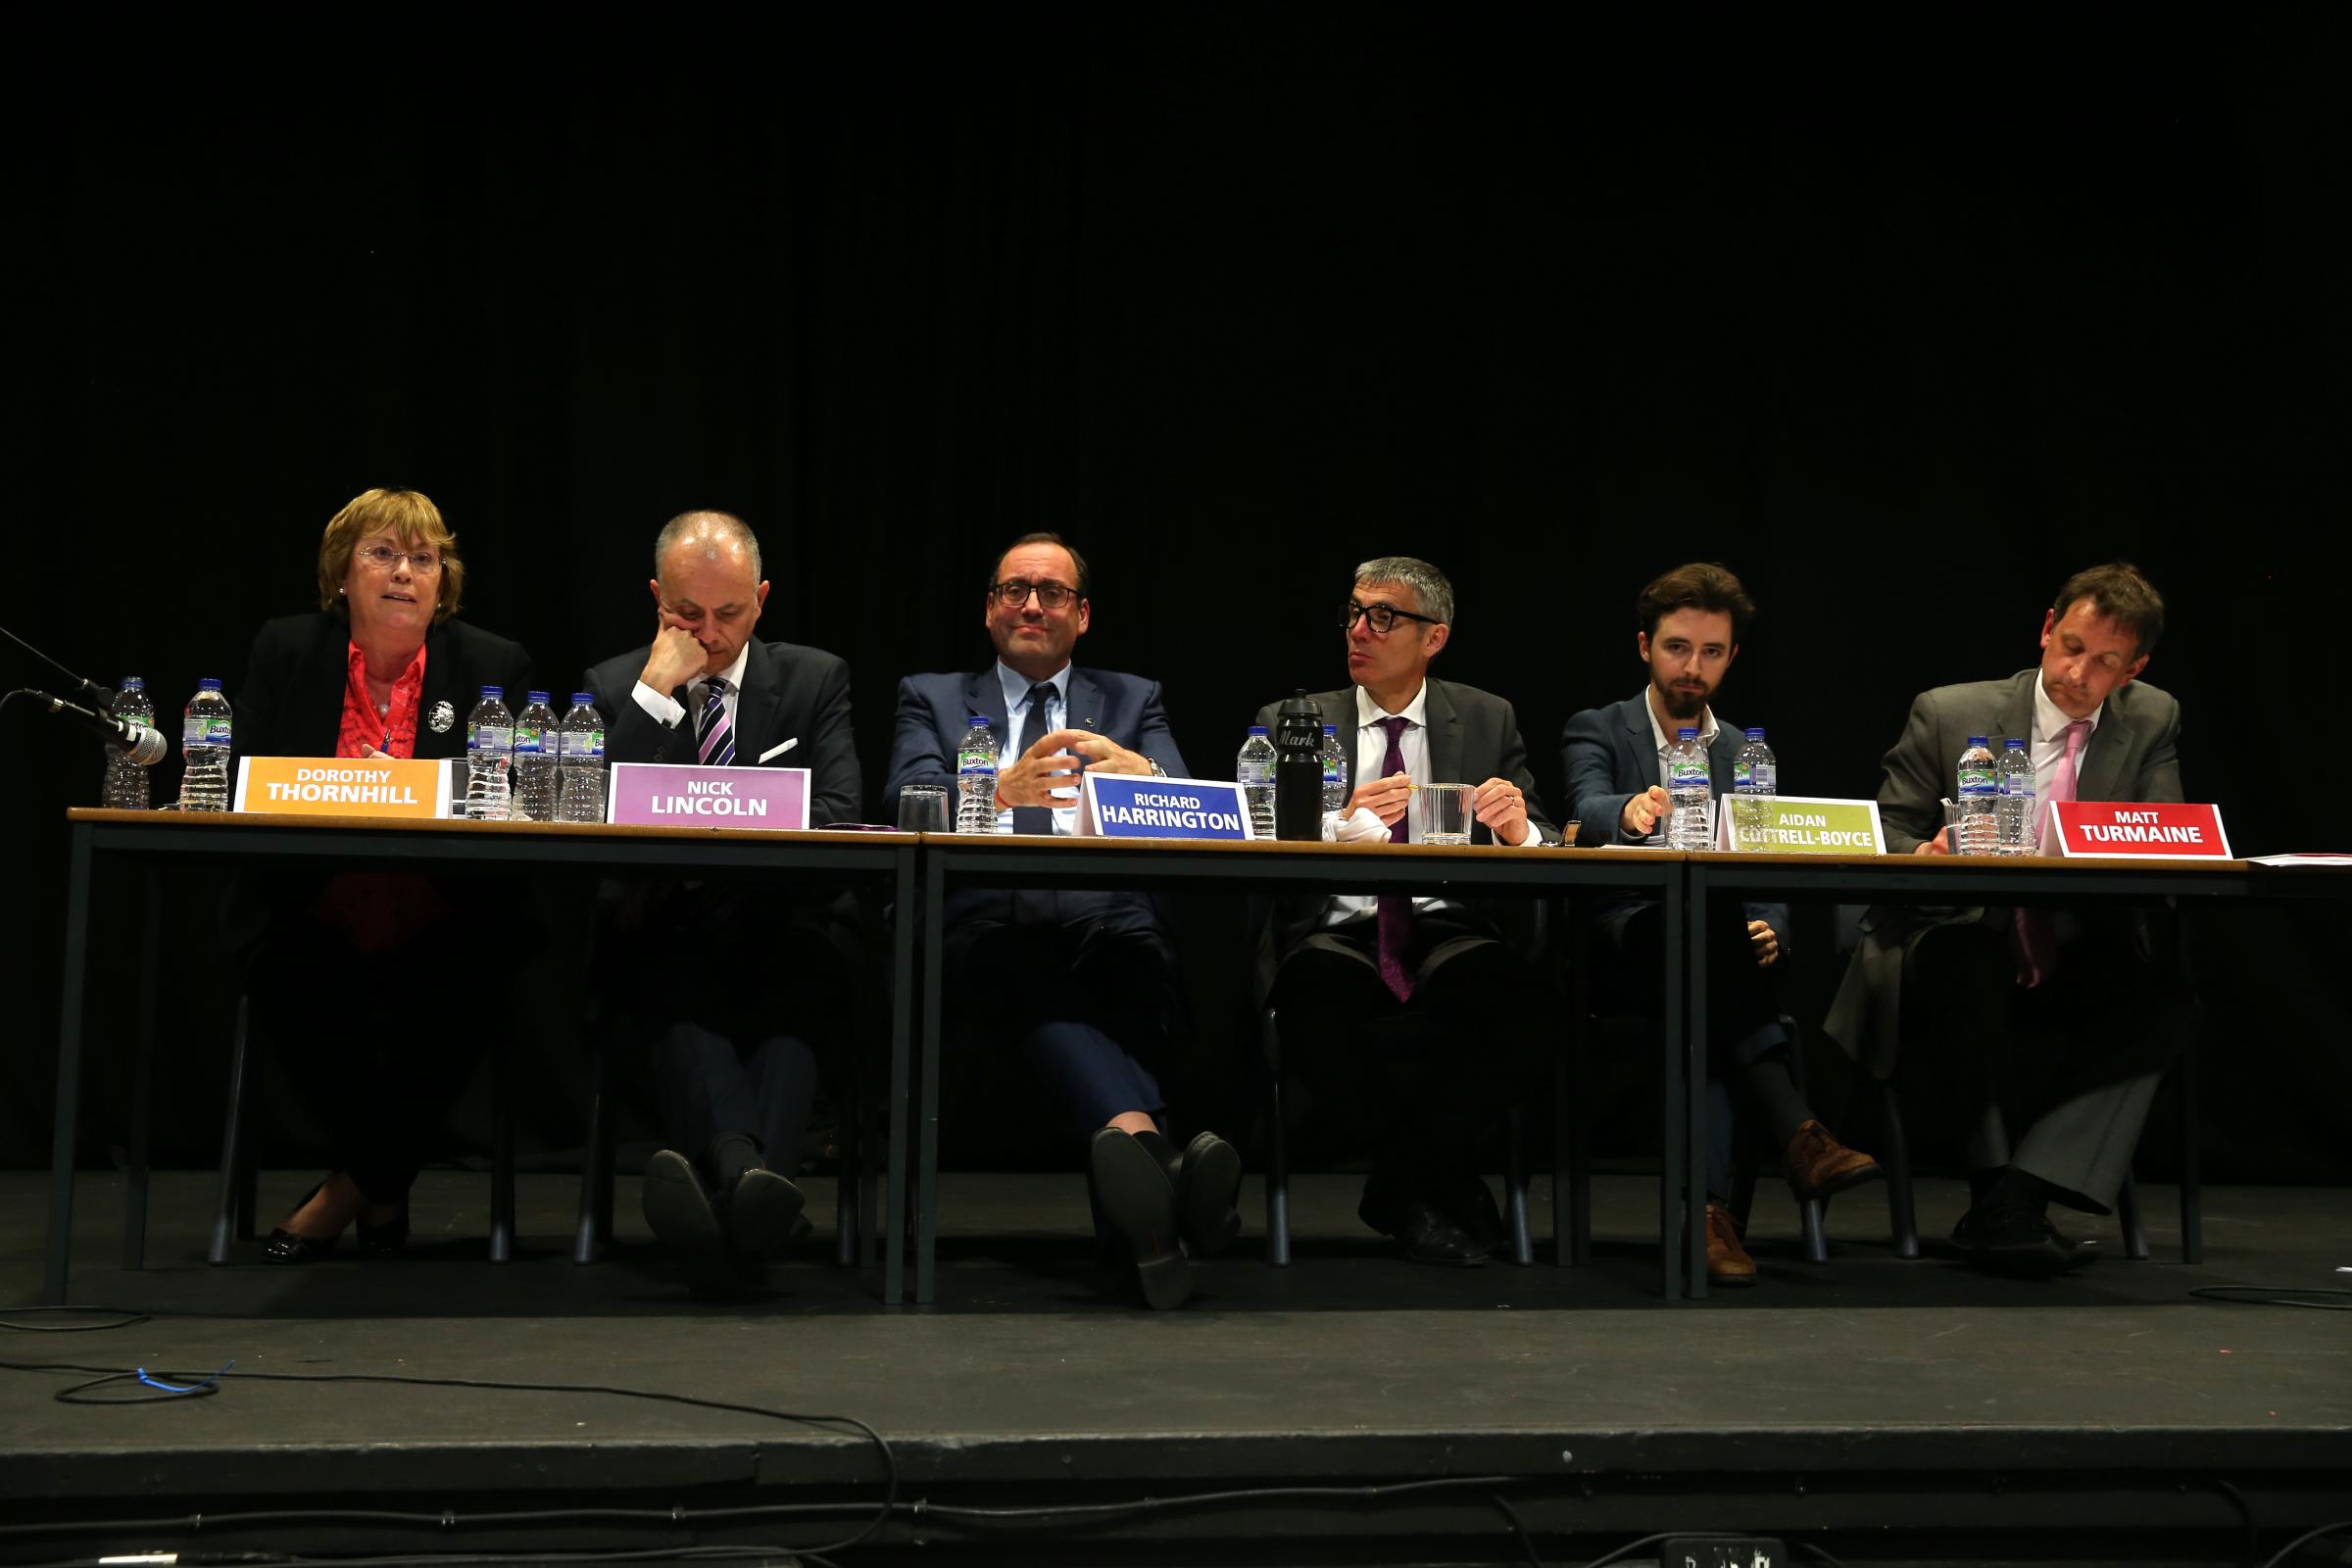 The Watford Observer hustings: one day left to send in your question